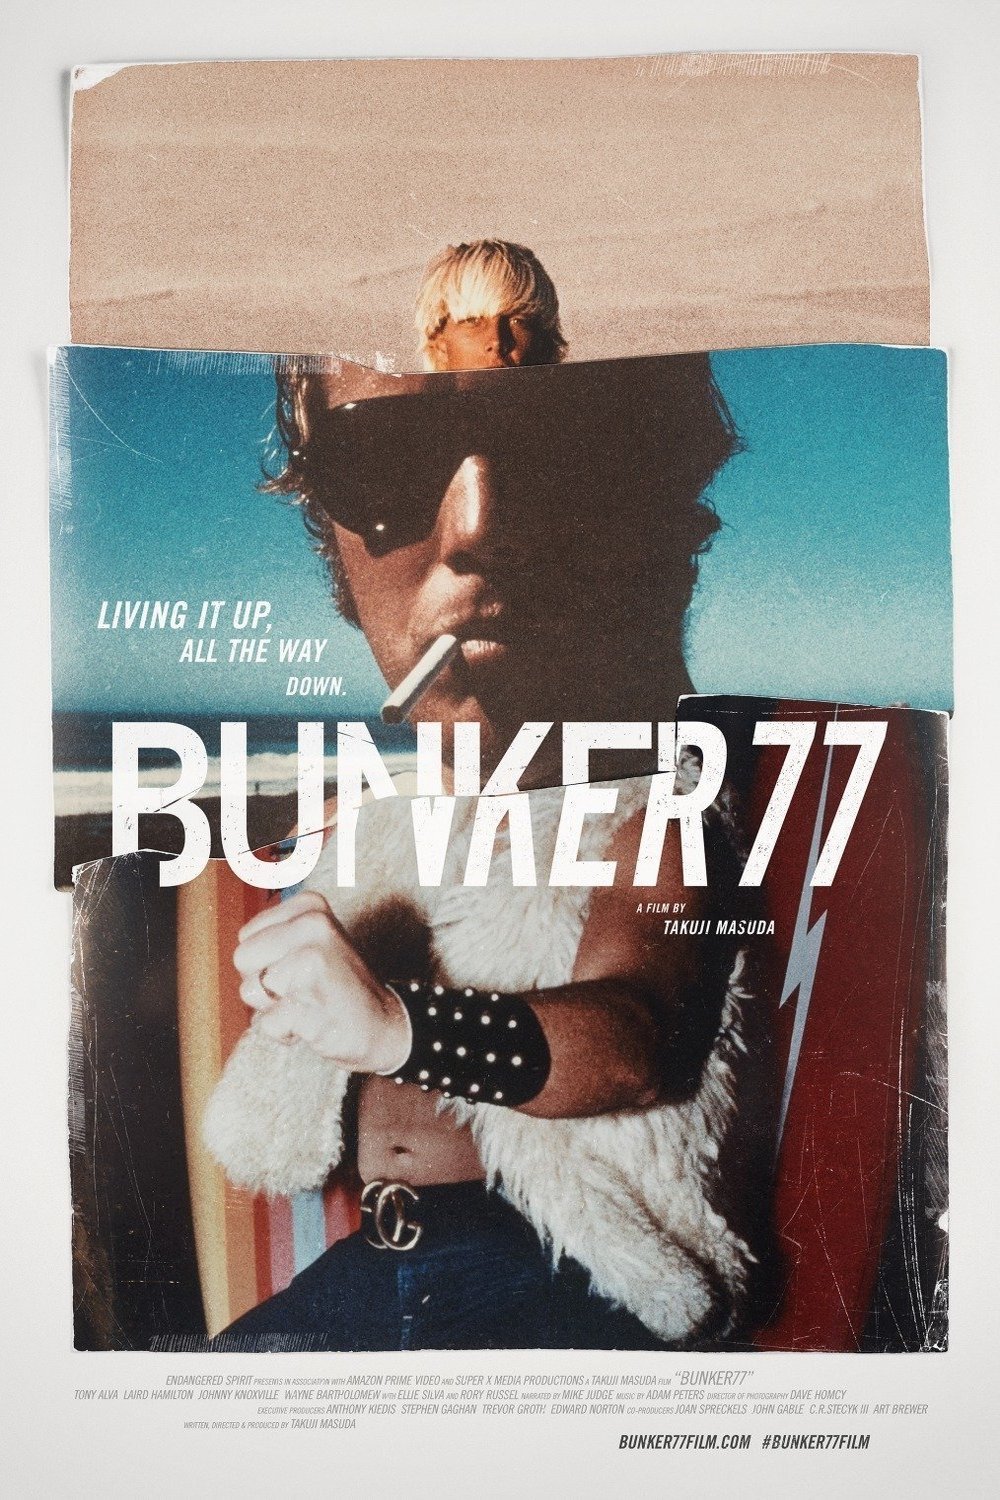 Poster of the movie Bunker77